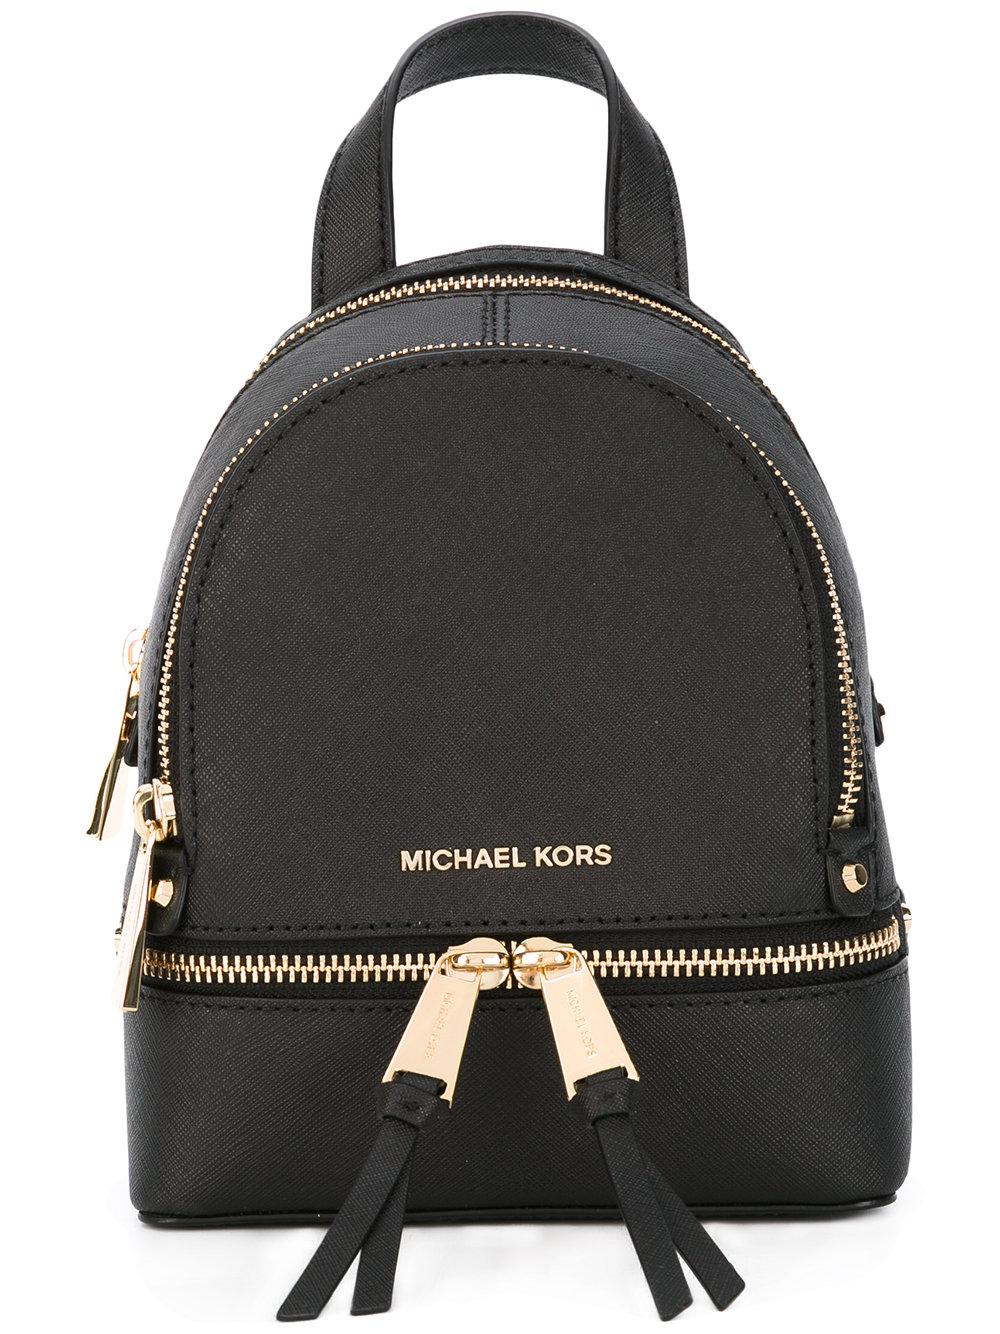 Lyst - Michael Michael Kors Removable Straps Mini Backpack in Black